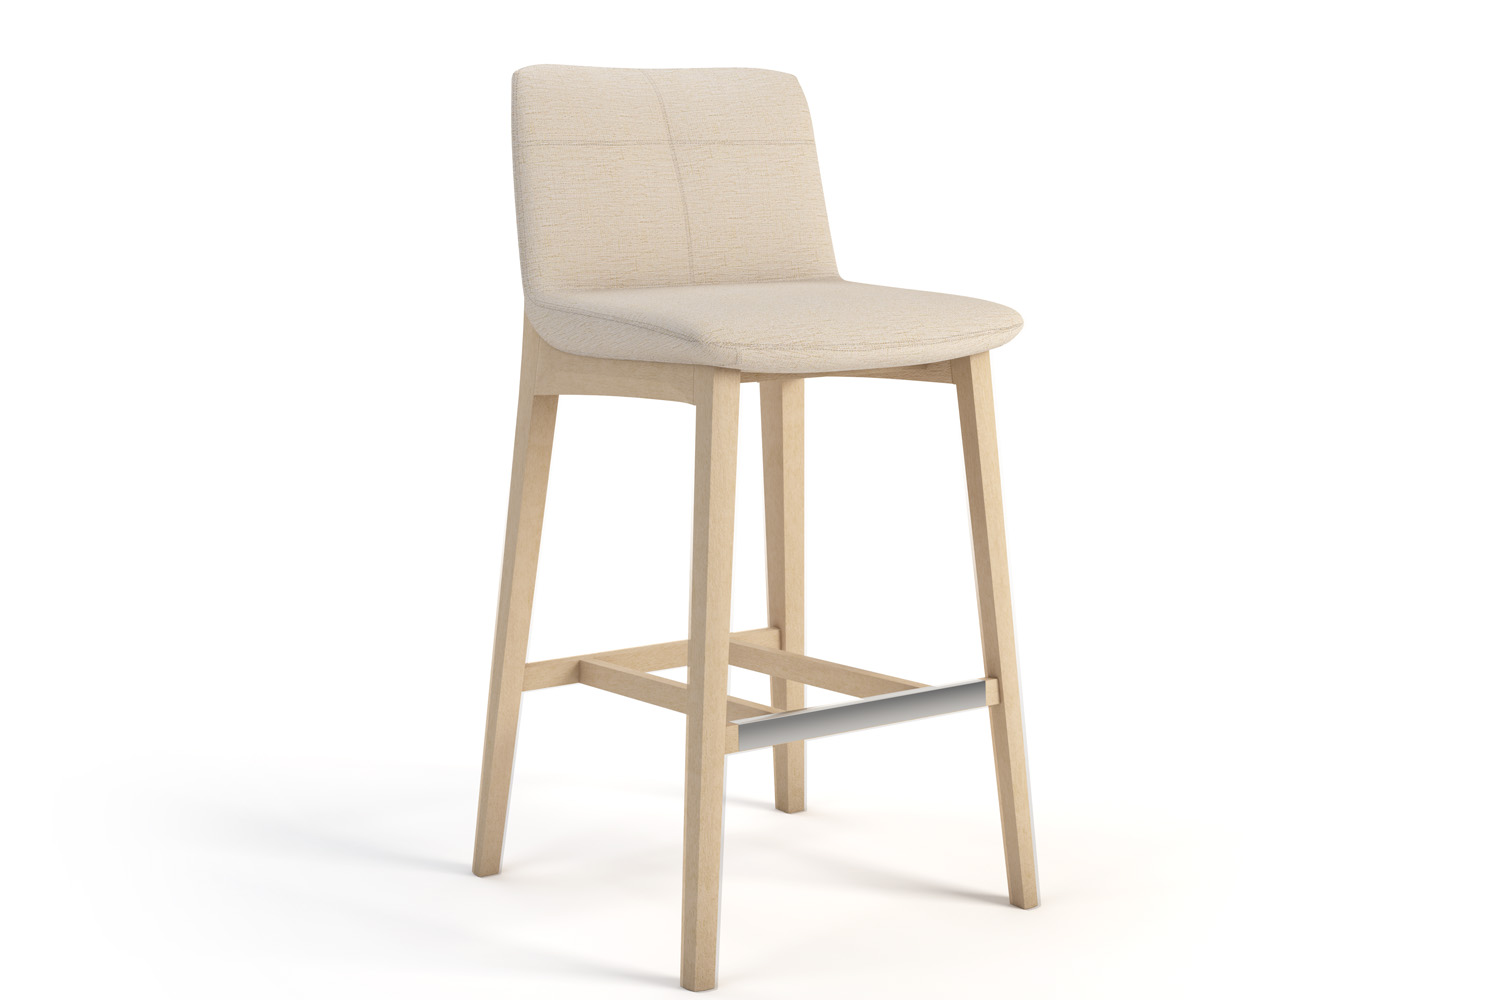 Addy Wood Base Barstool with Footrest